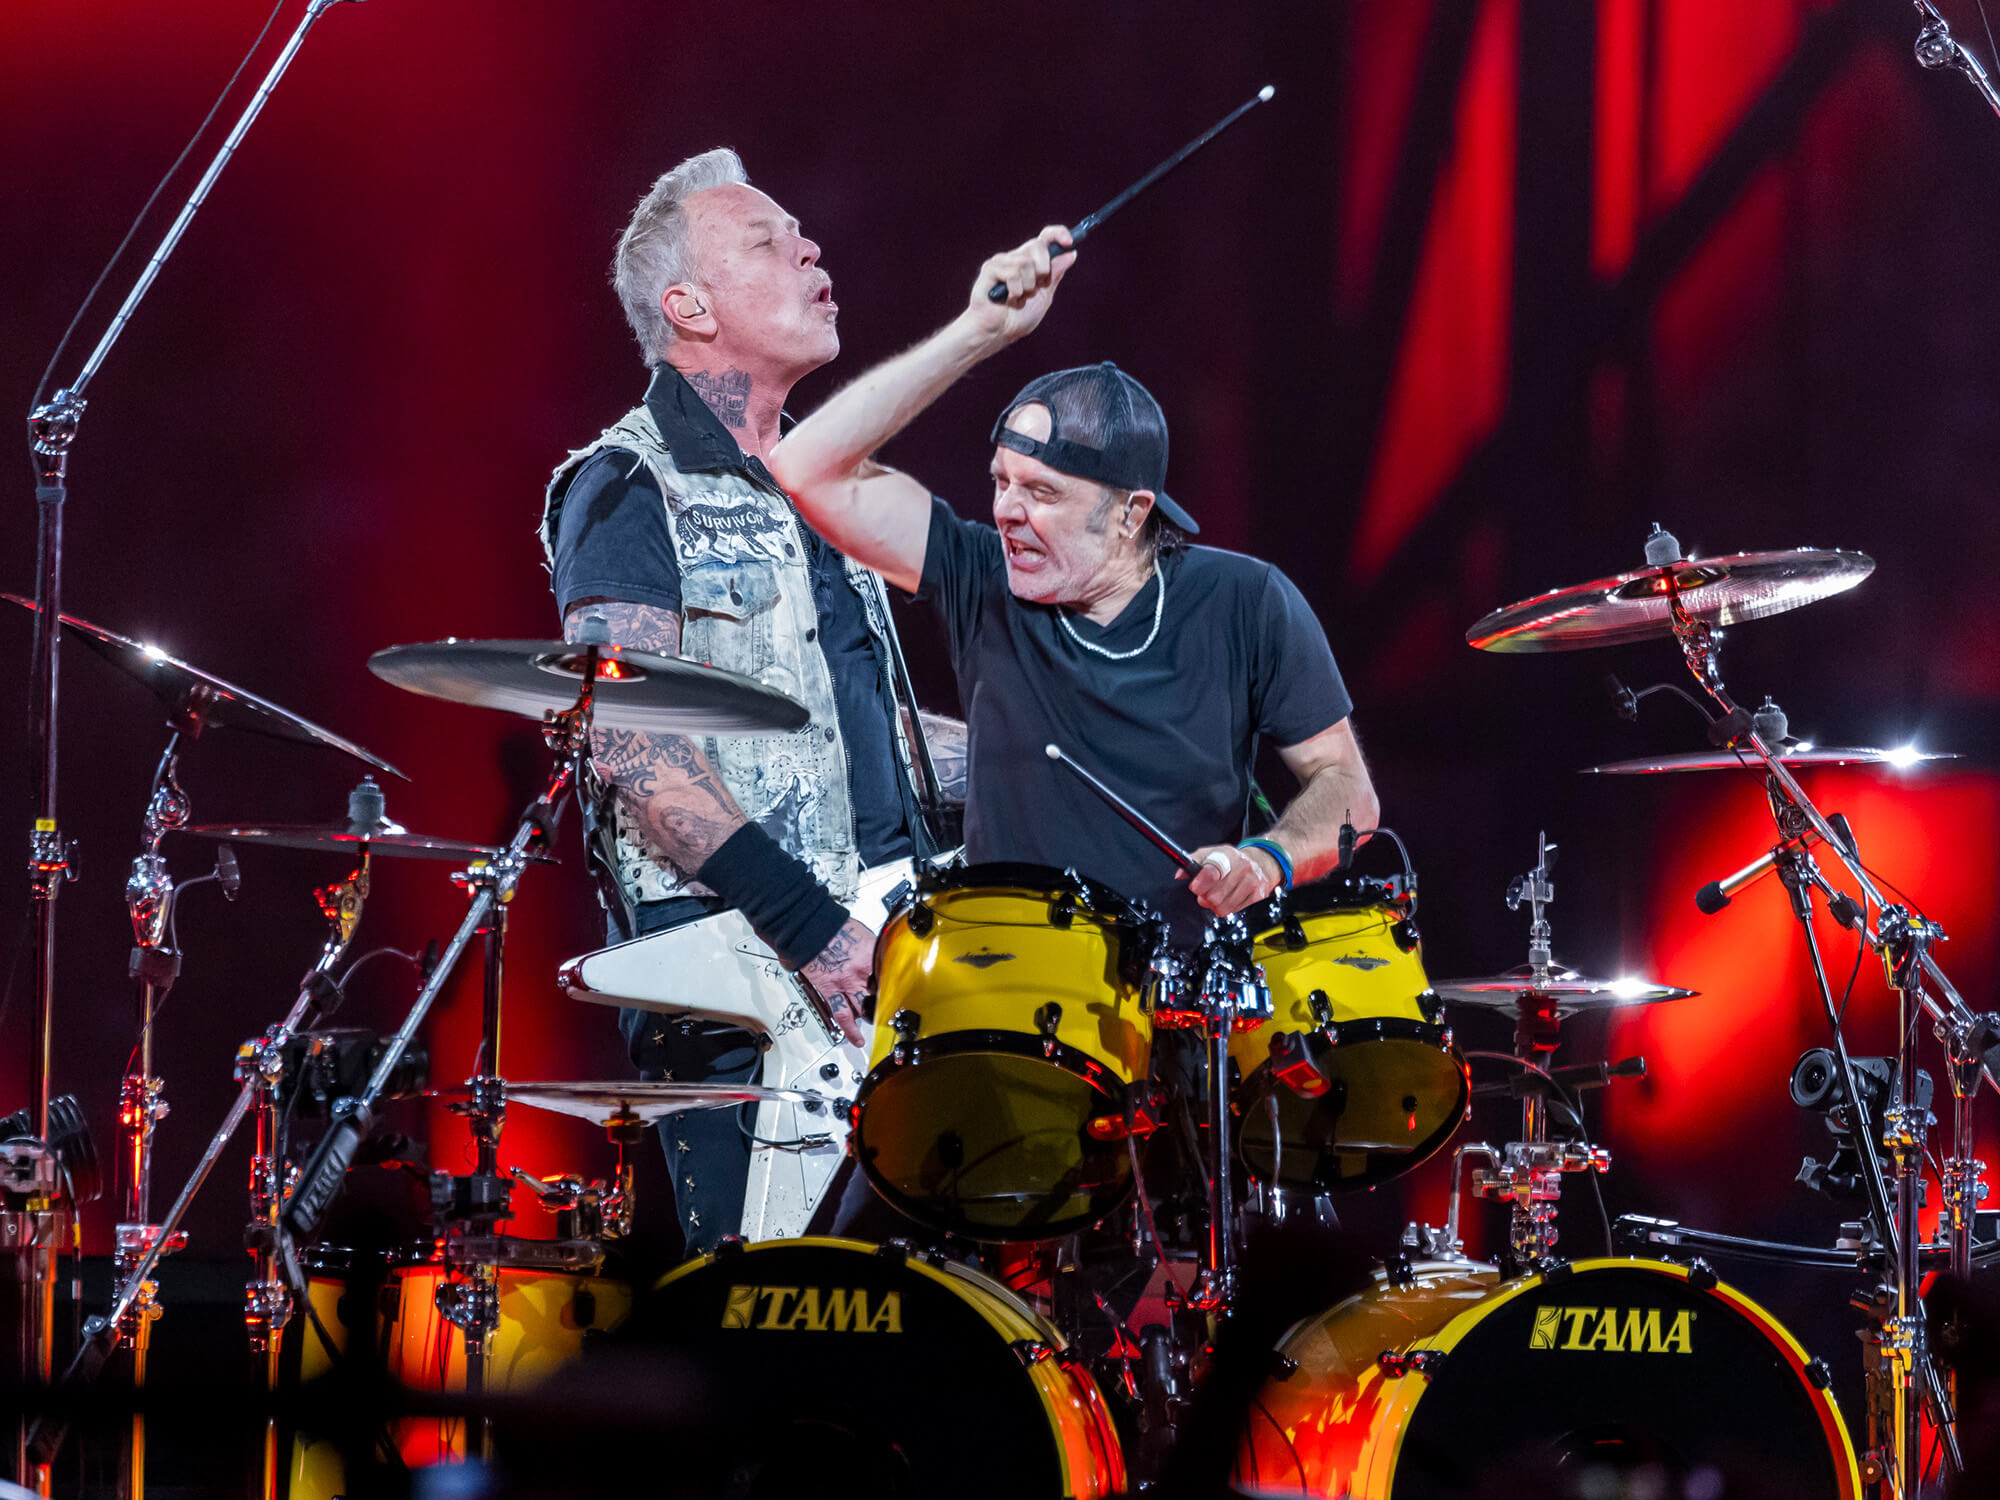 James Hetfield and drummer Lars Ulrich on stage. James is playing his white Flying V and Lars has one hand mid-air ready to hit a drum.